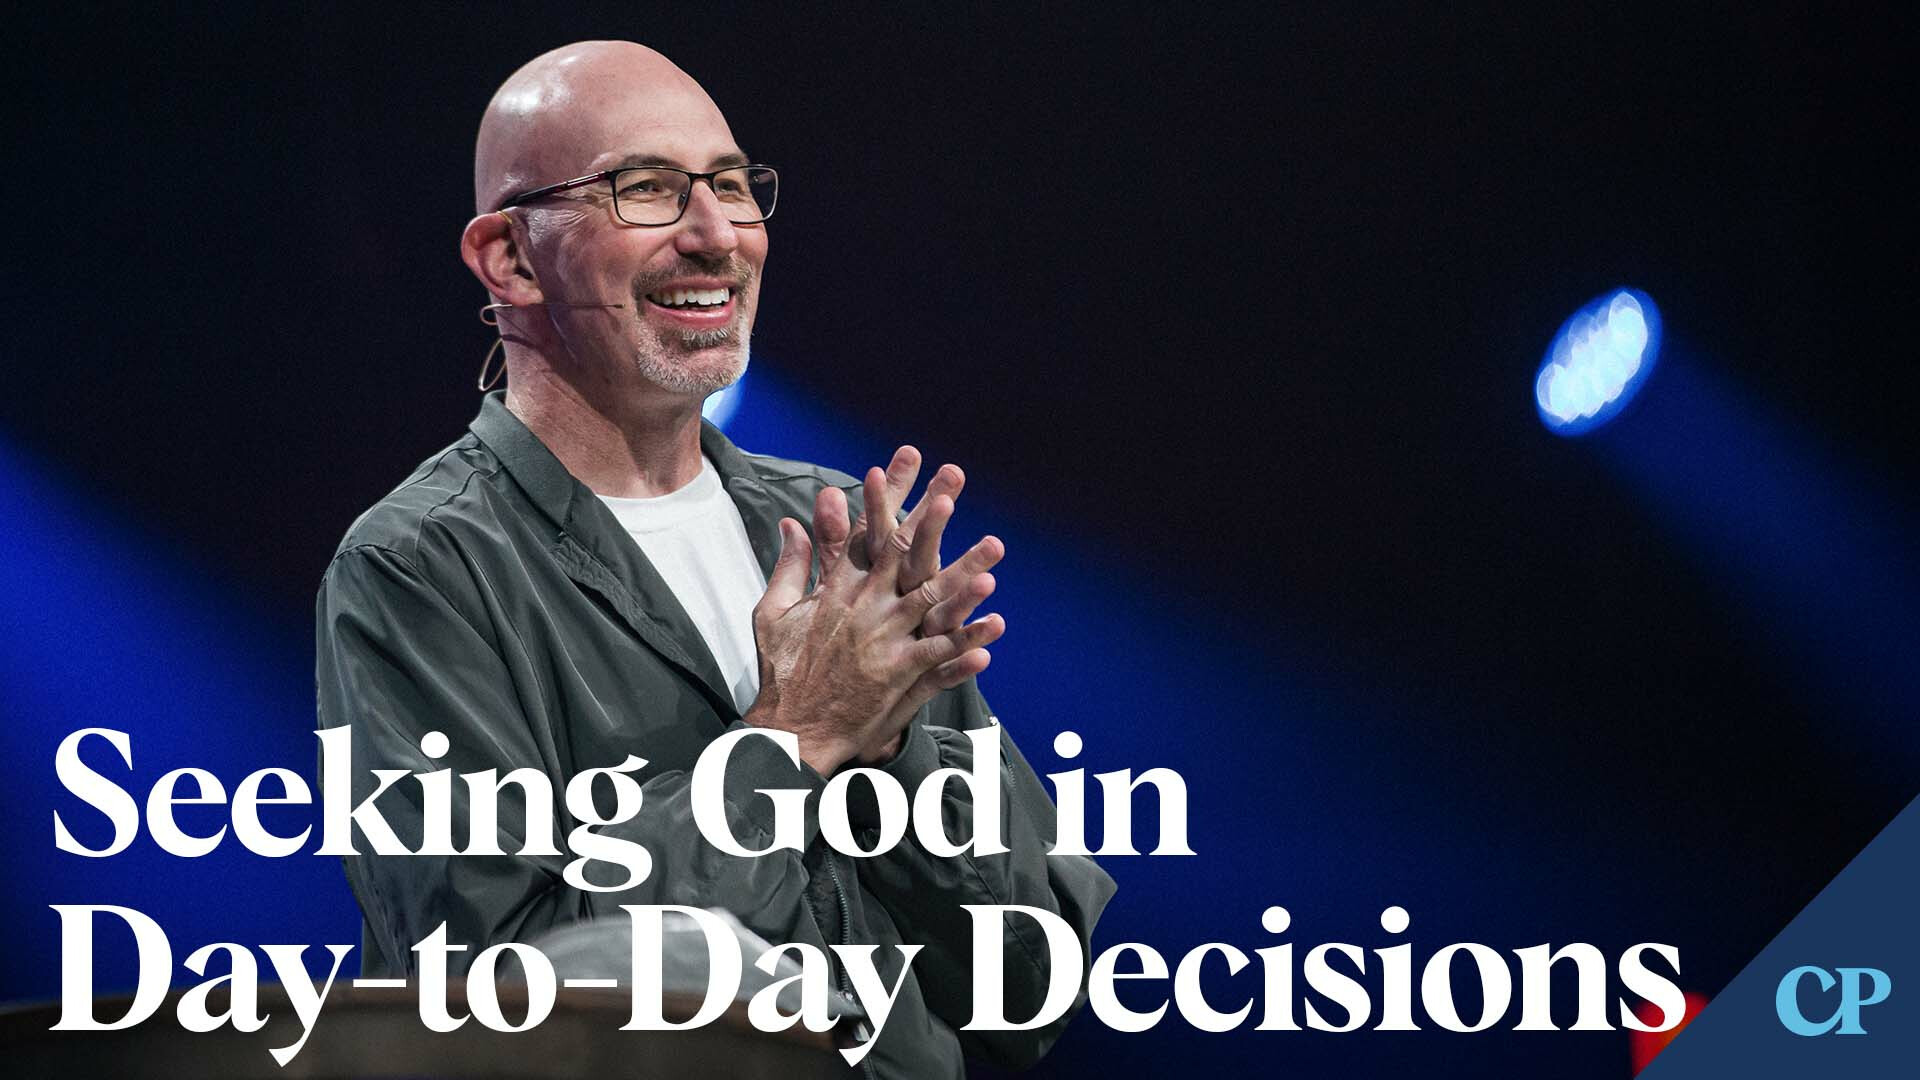 Seeking God in Day-to-Day Decisions